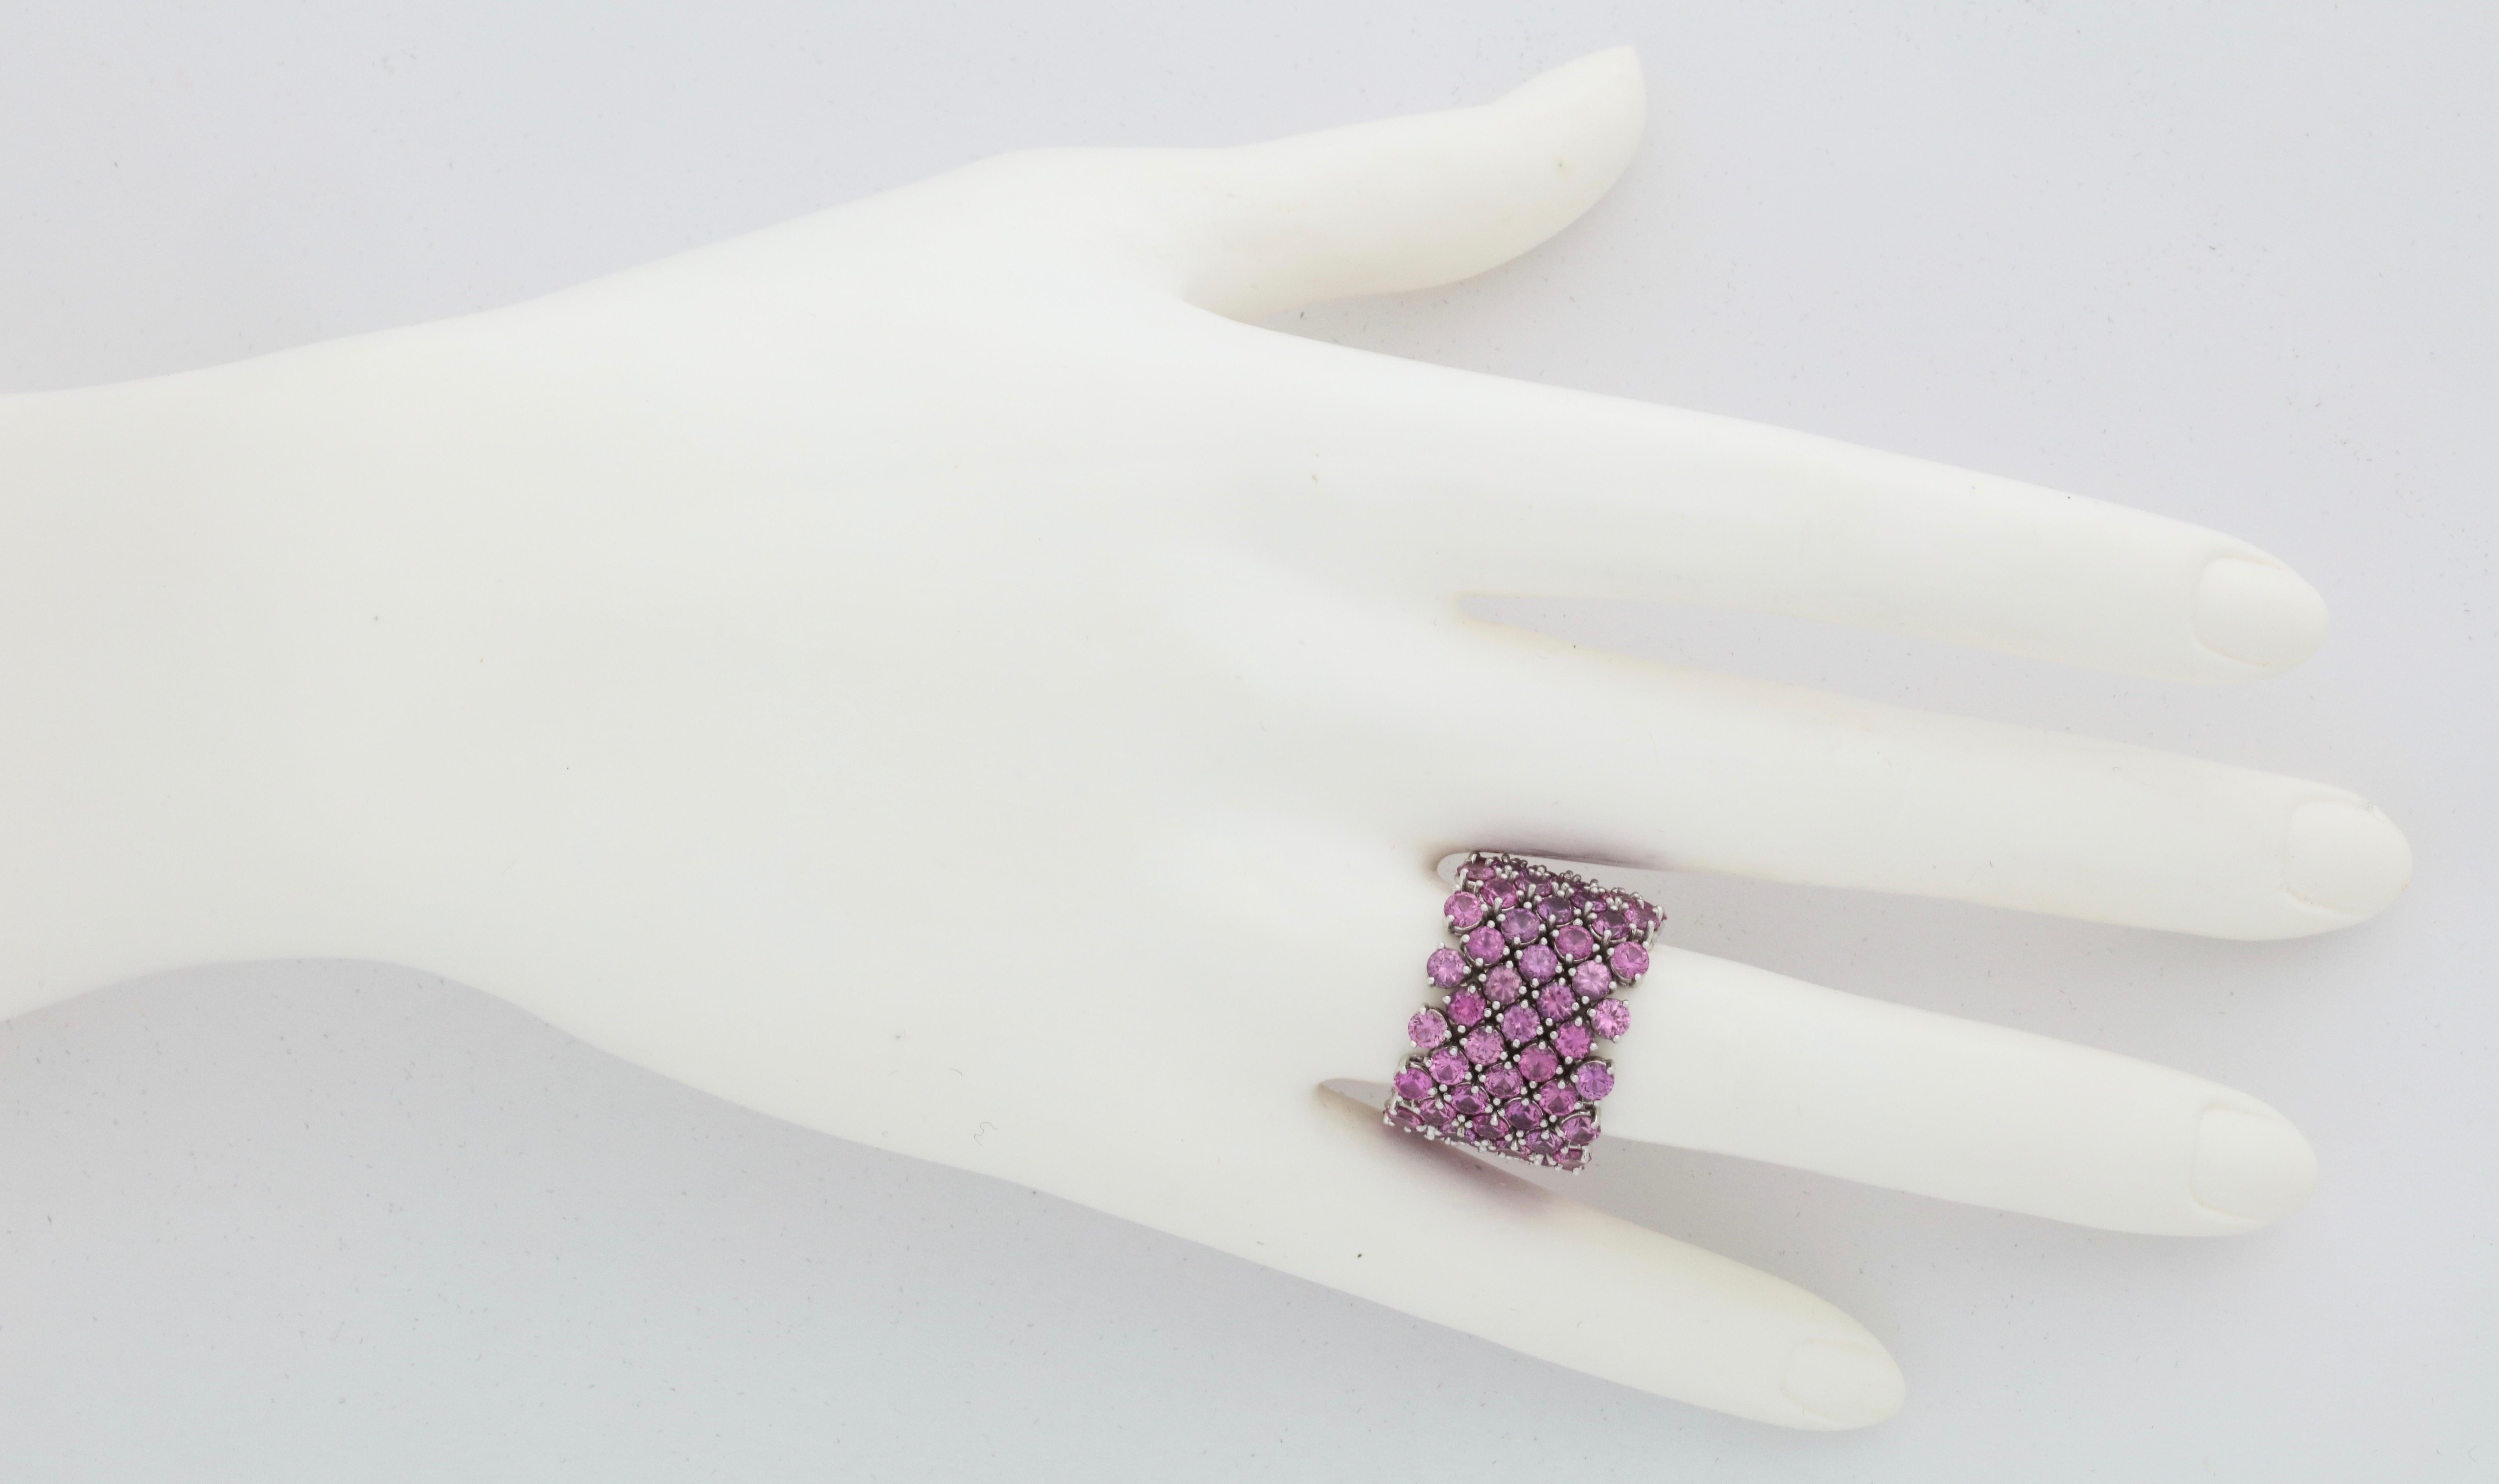 This ring is simply the most flexible, comfortable, colorful and elegant wide band that you will ever own.  Once you experience the effect of such superior craftsmanship you will be smitten.   Seven rows containing 98 perfectly matched stones weigh